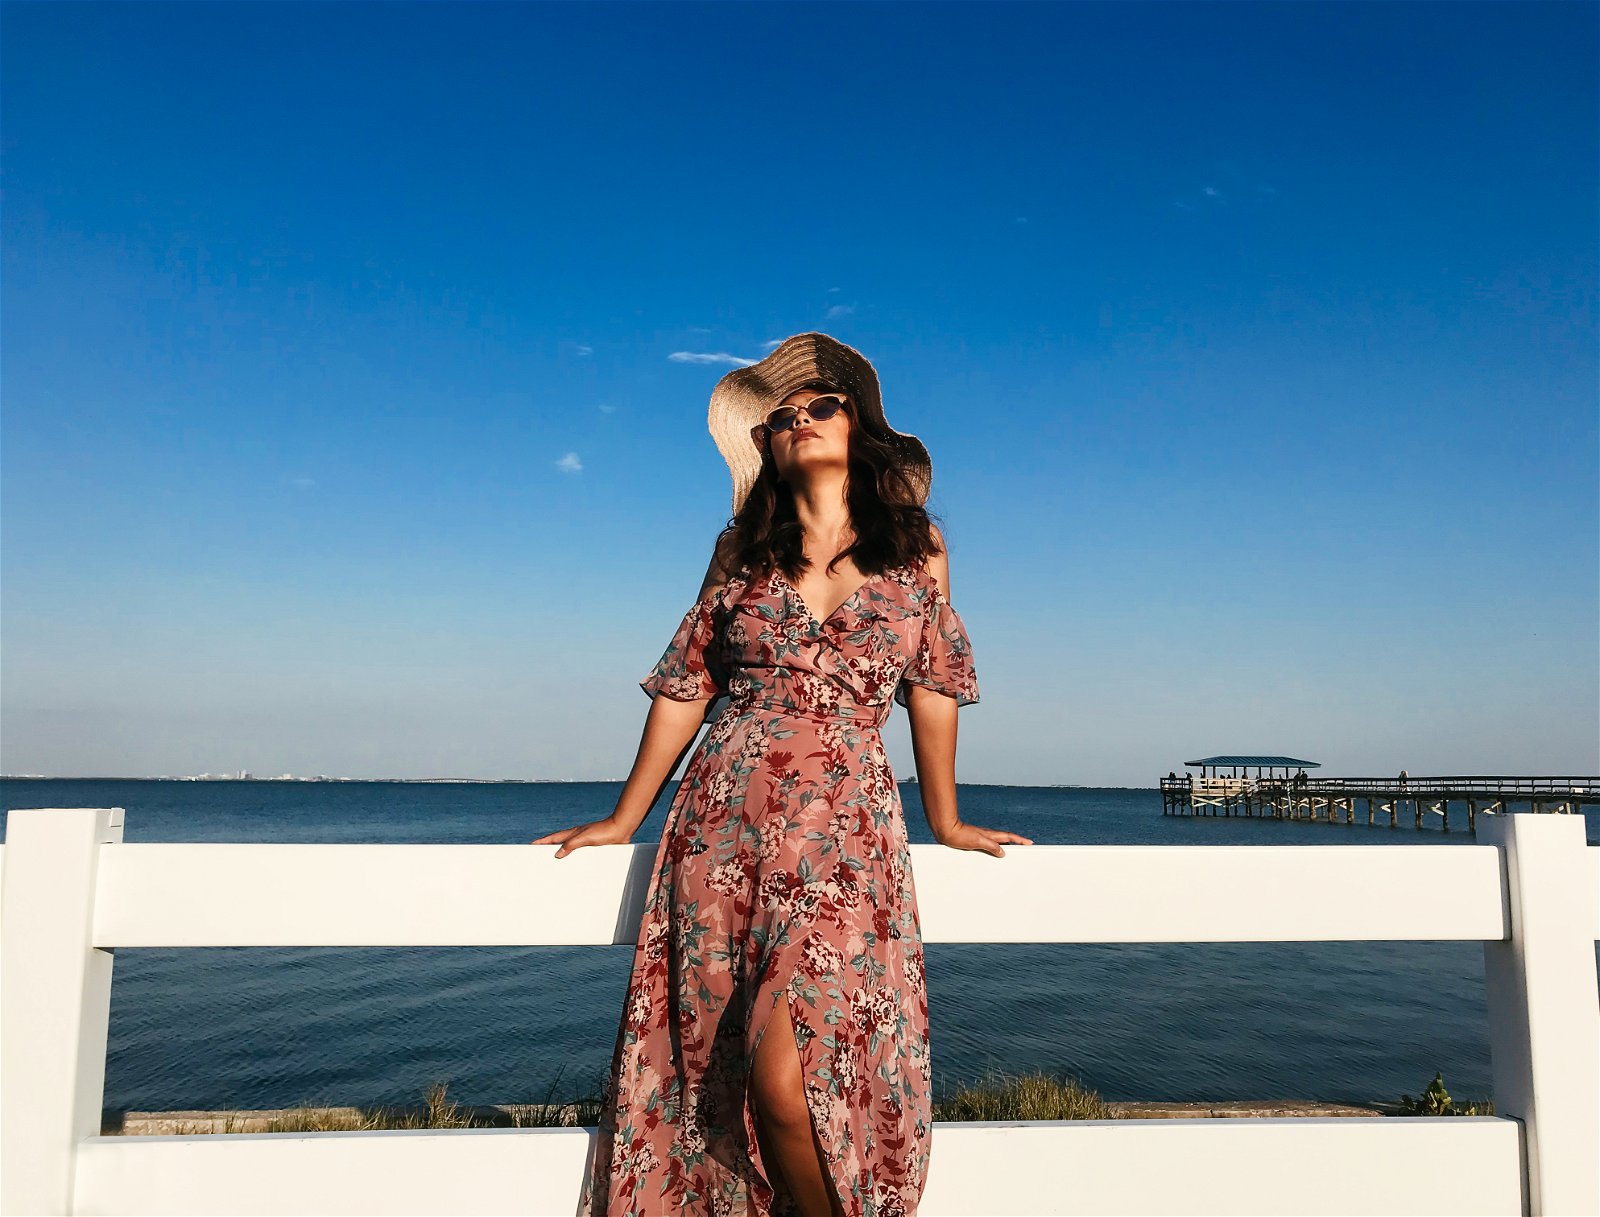 A woman in a dress sun hat and sunglasses posing for a fashion shot against a white fence water a pier and blue sky